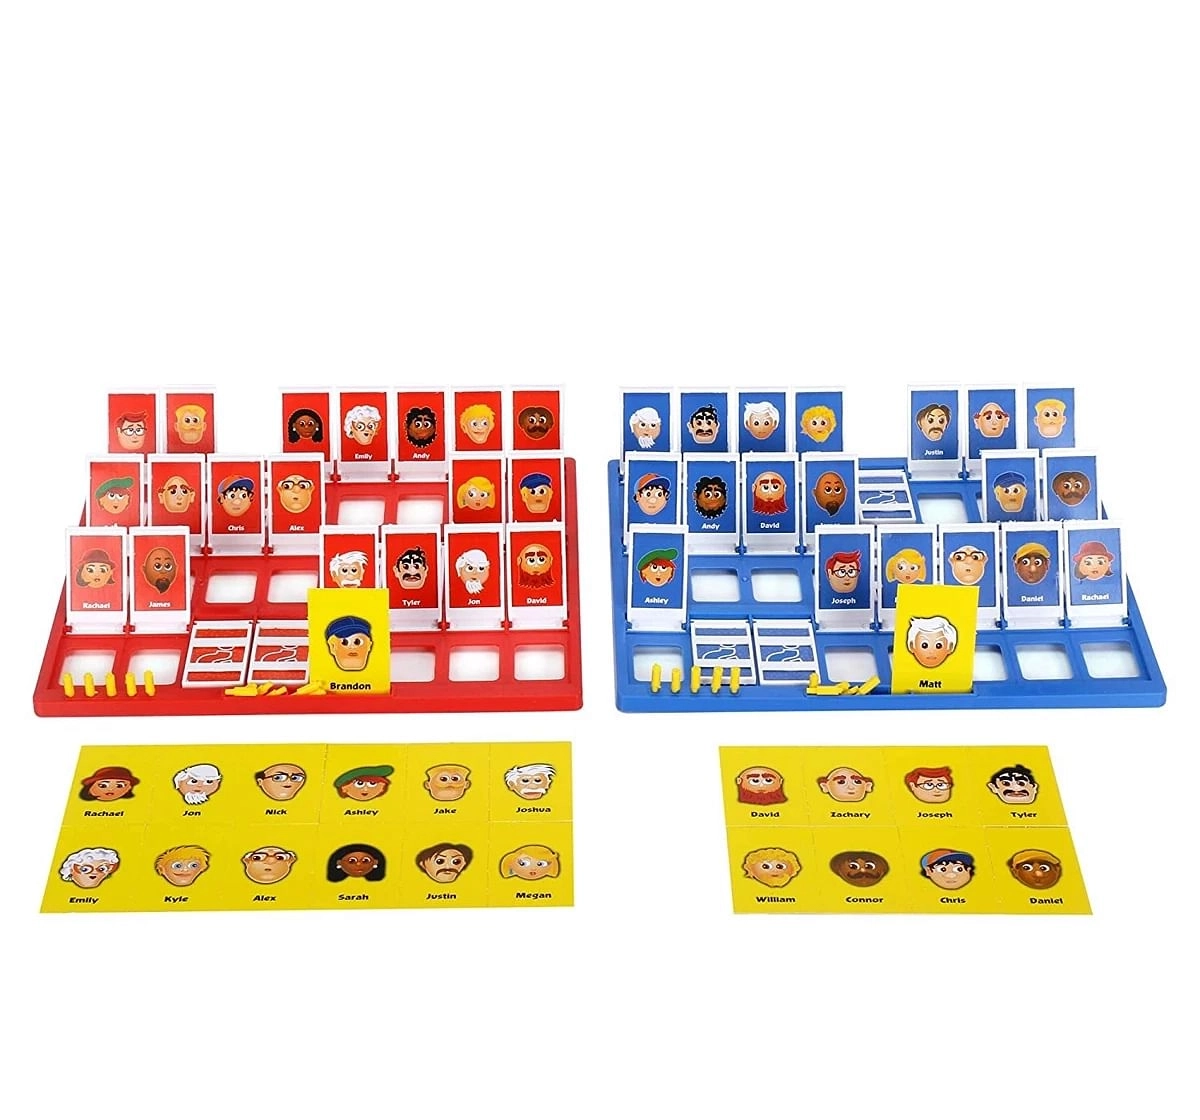 HASBRO GAMING Guess Who? Original Guessing Game, Double-Sided Character  Sheet for Kids Educational Board Games Board Game - Guess Who? Original  Guessing Game, Double-Sided Character Sheet for Kids . Buy Board Game